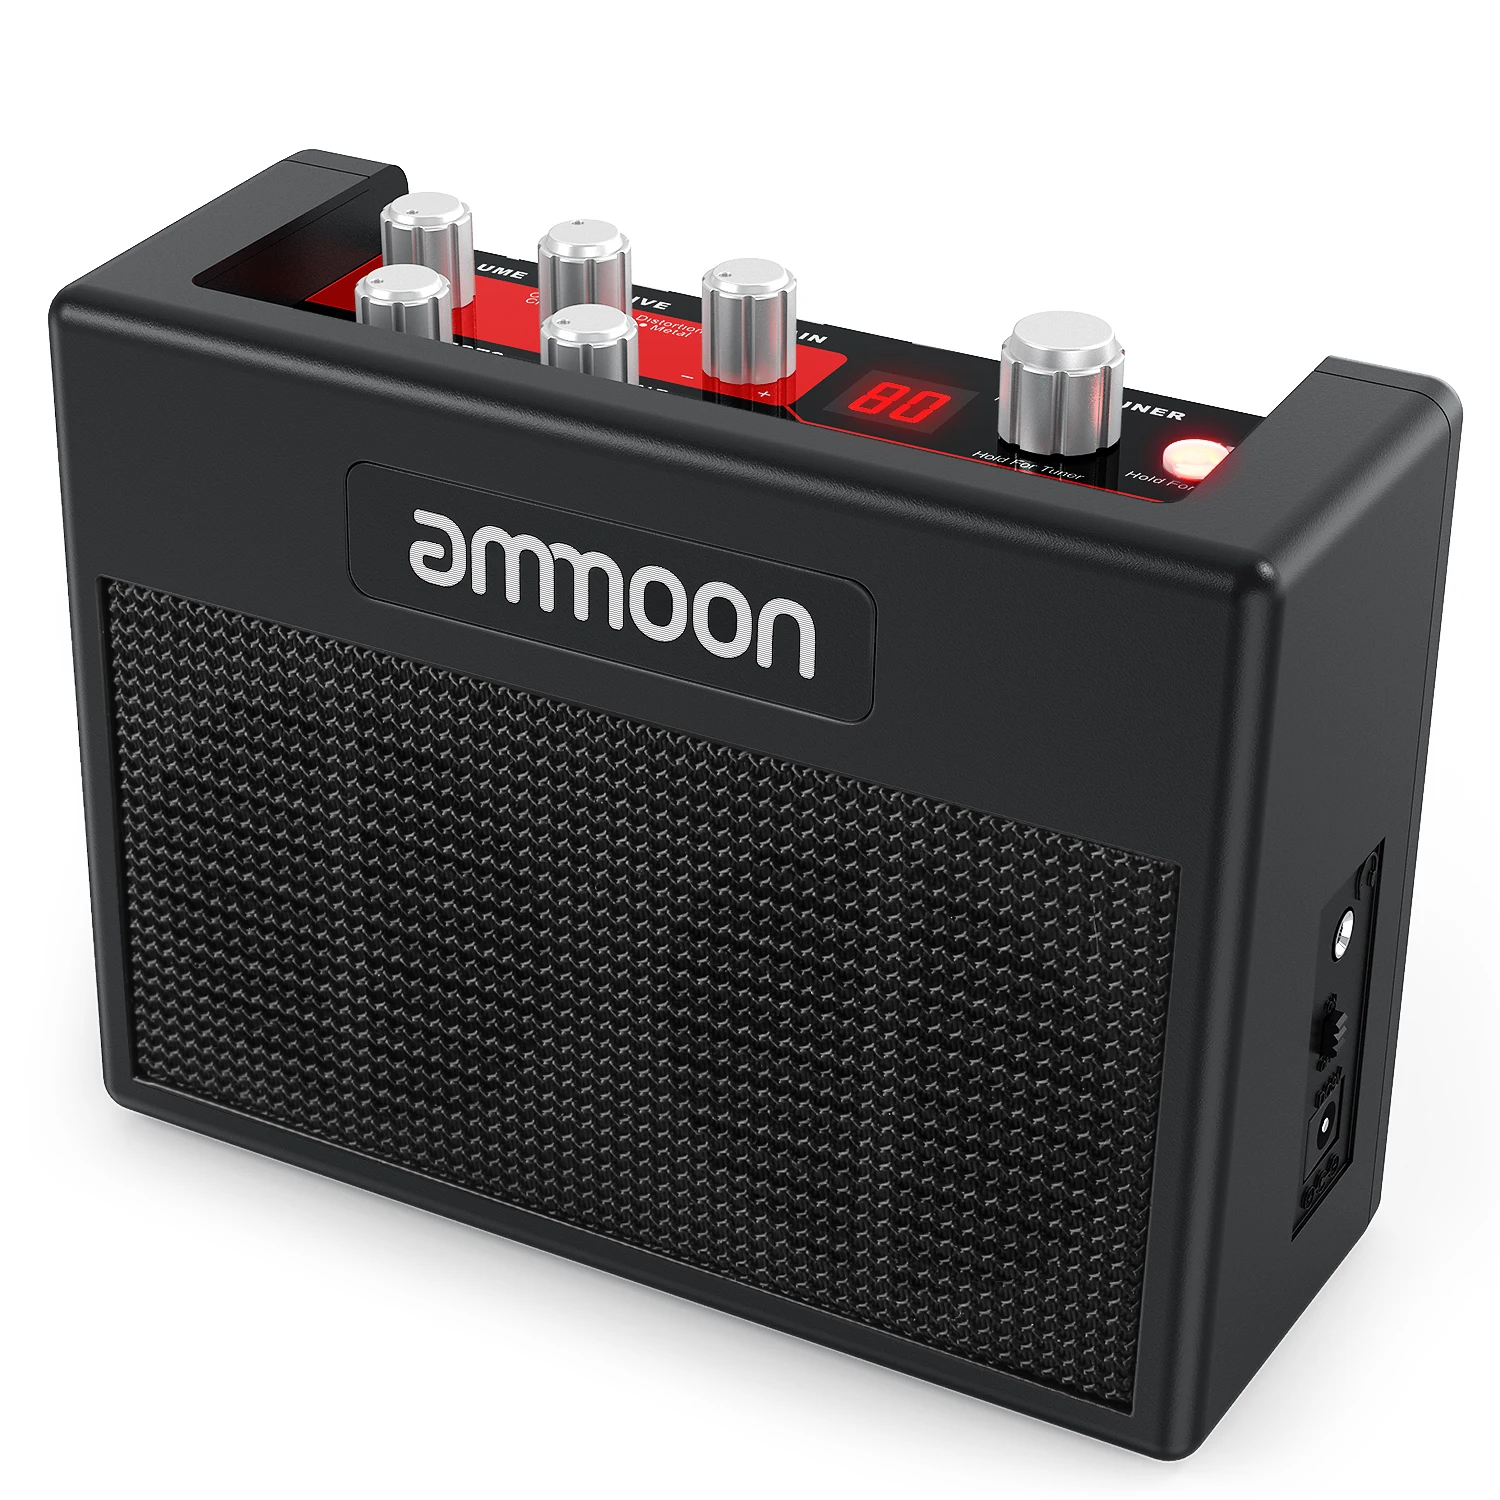 ammoon POCKAMP Guitar Amplifier Built-in Multi-effects 80 Drum Rhythms Support Tuner Tap Tempo Function with Power Adapter enlarge